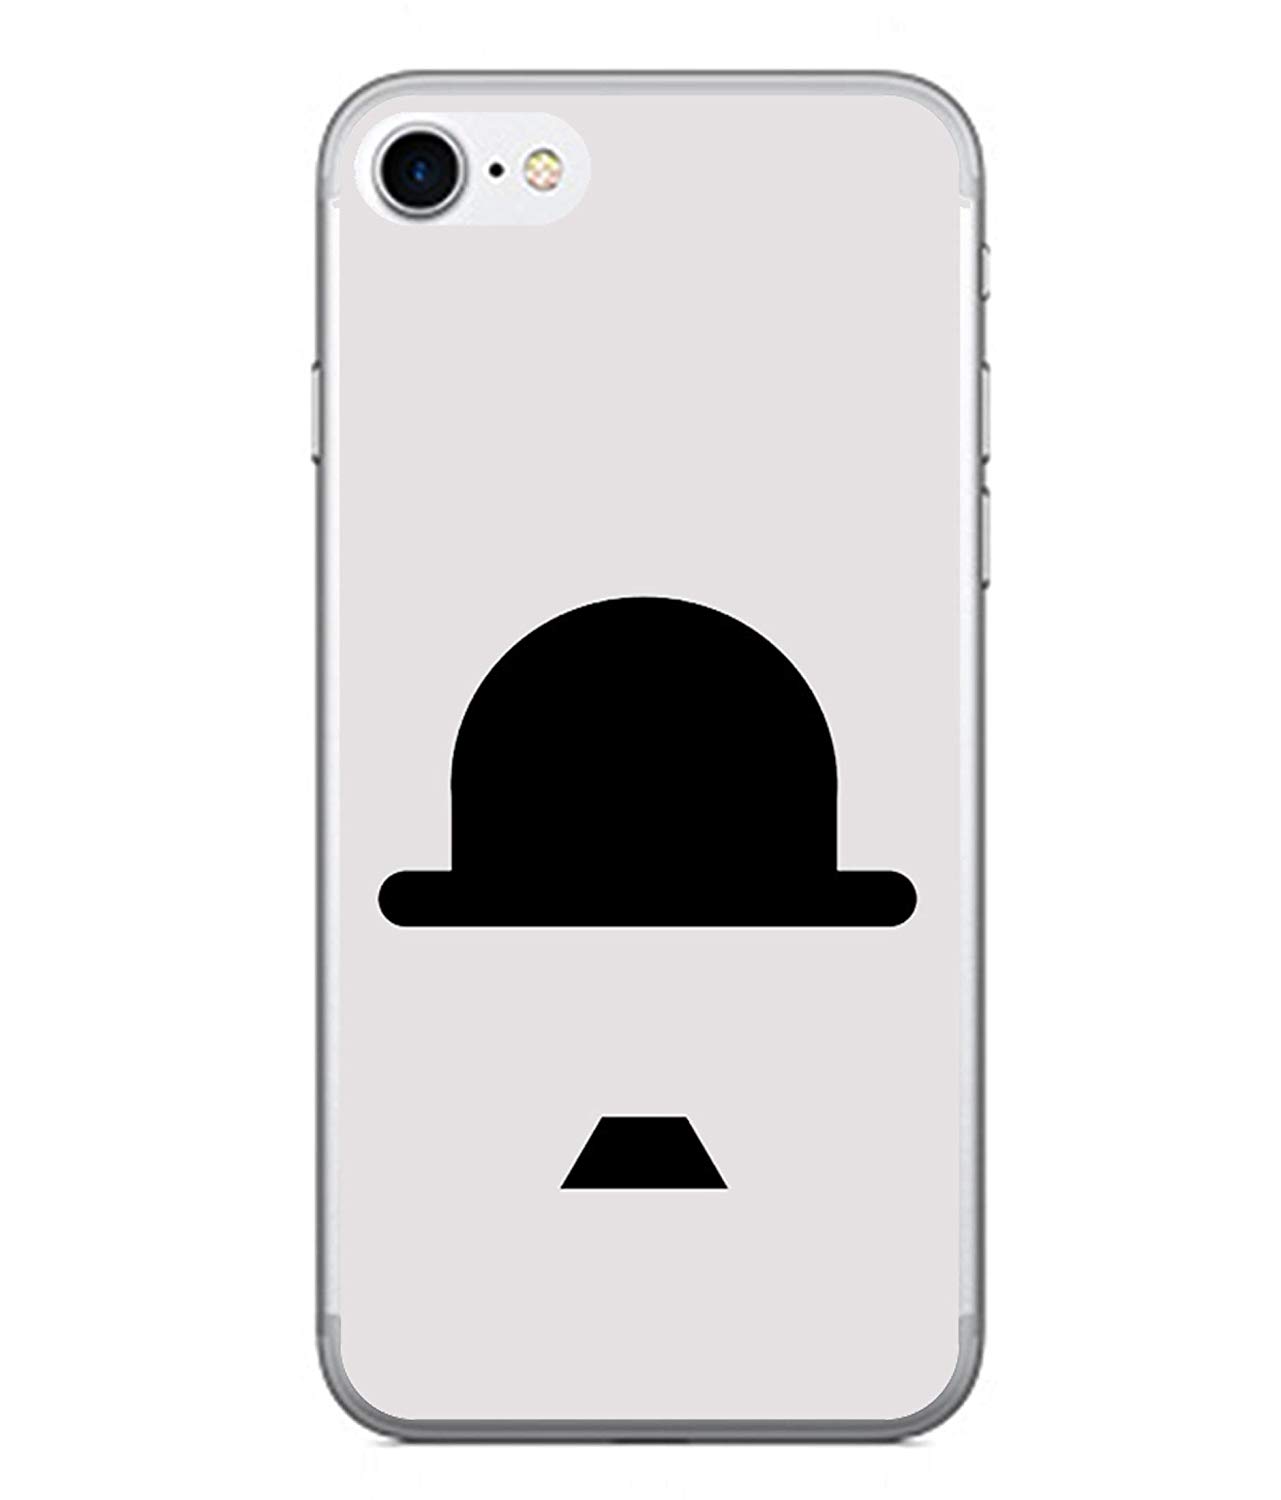 iphone clipart simple phone